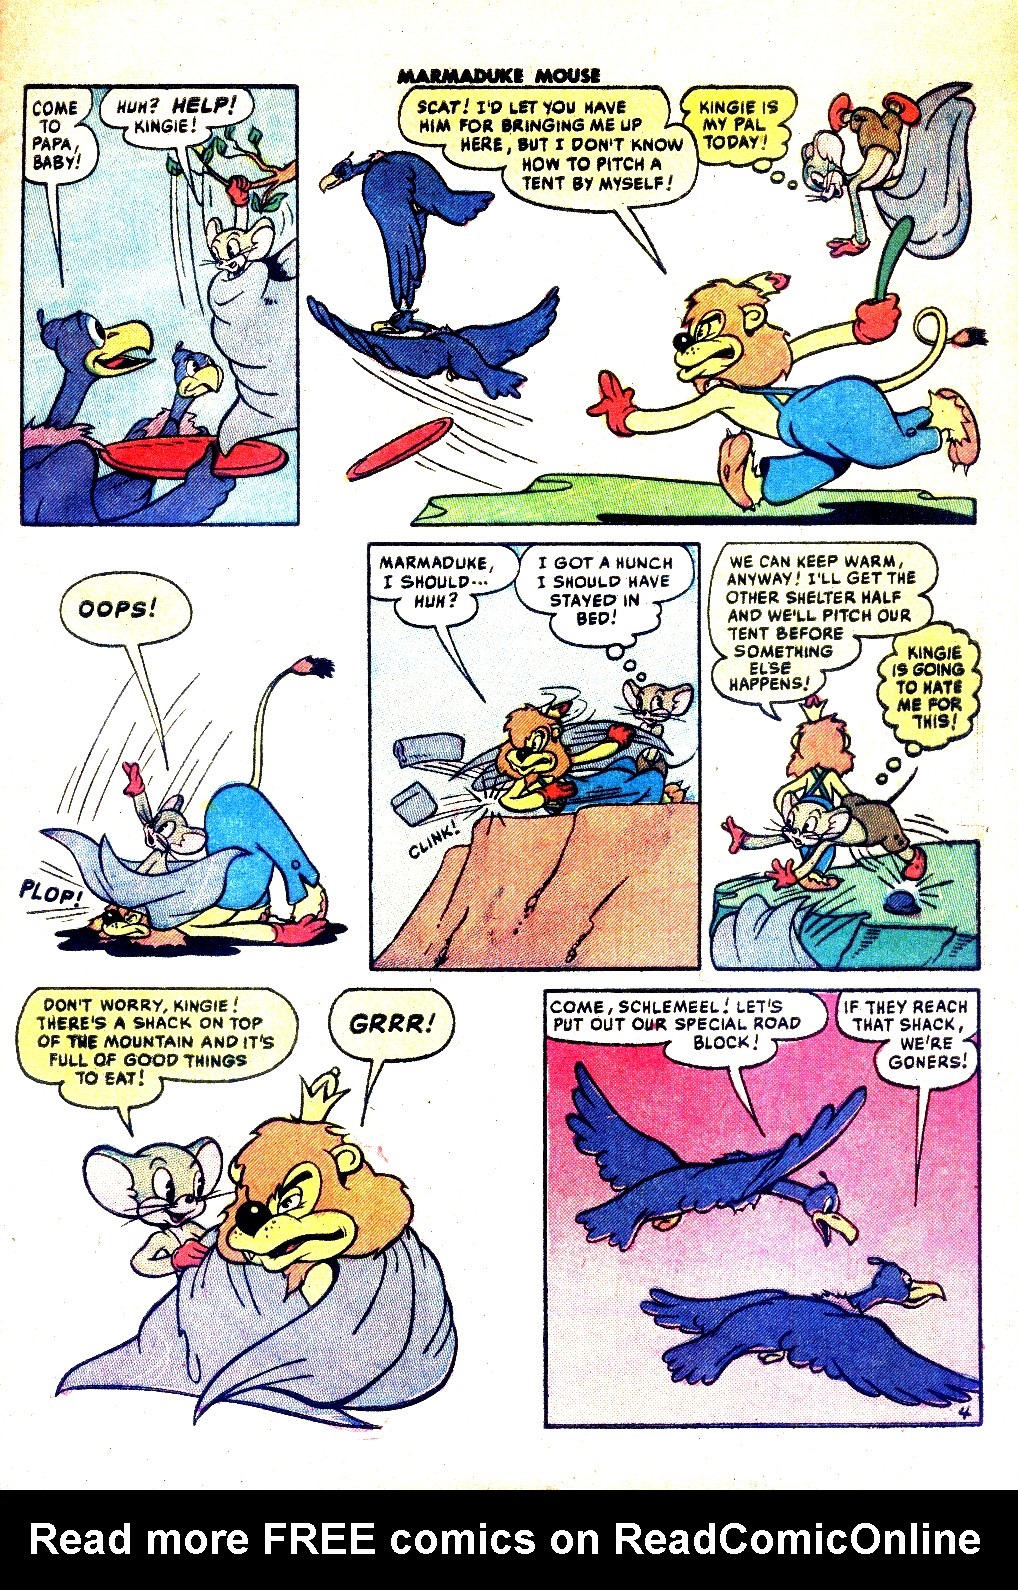 Read online Marmaduke Mouse comic -  Issue #53 - 29